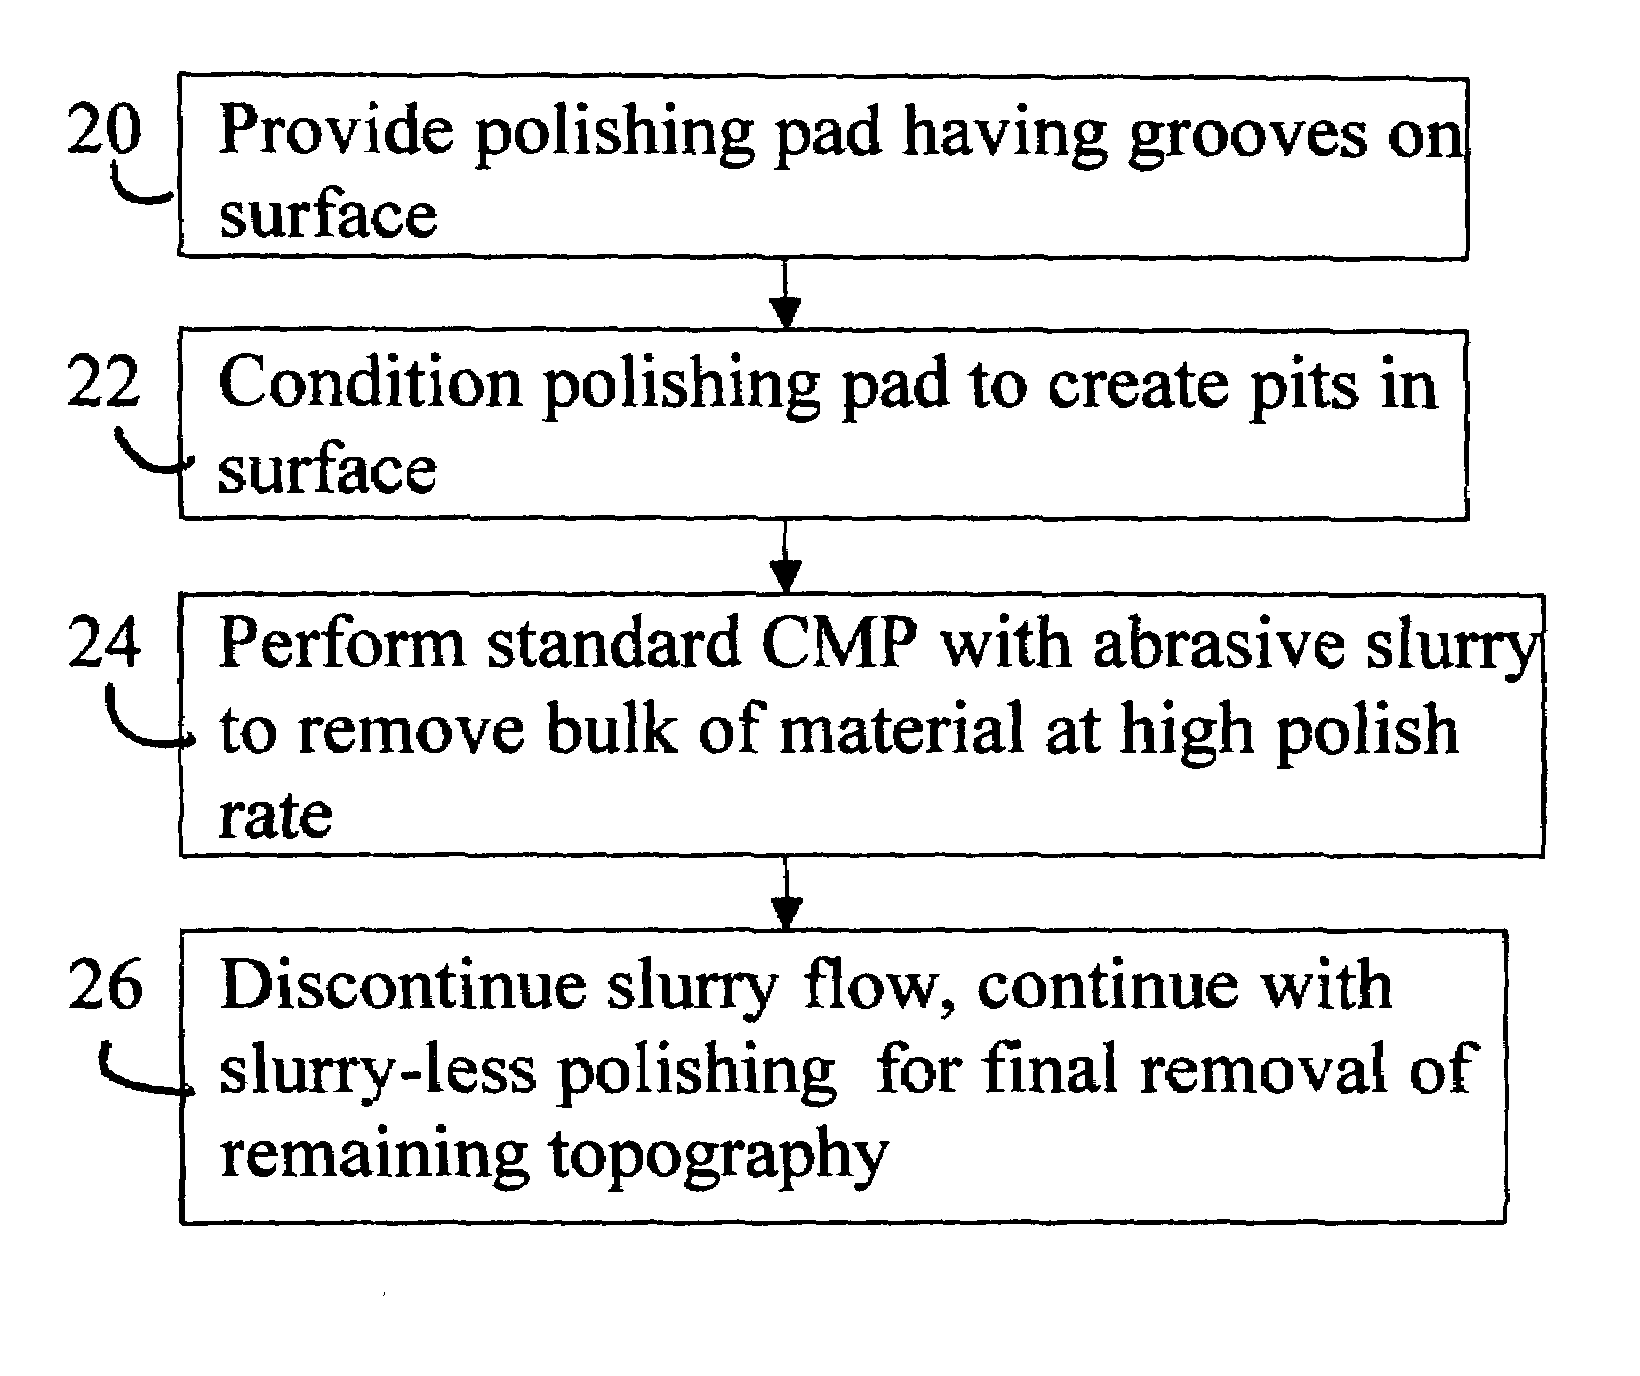 Slurry-less polishing for removal of excess interconnect material during fabrication of a silicon integrated circuit